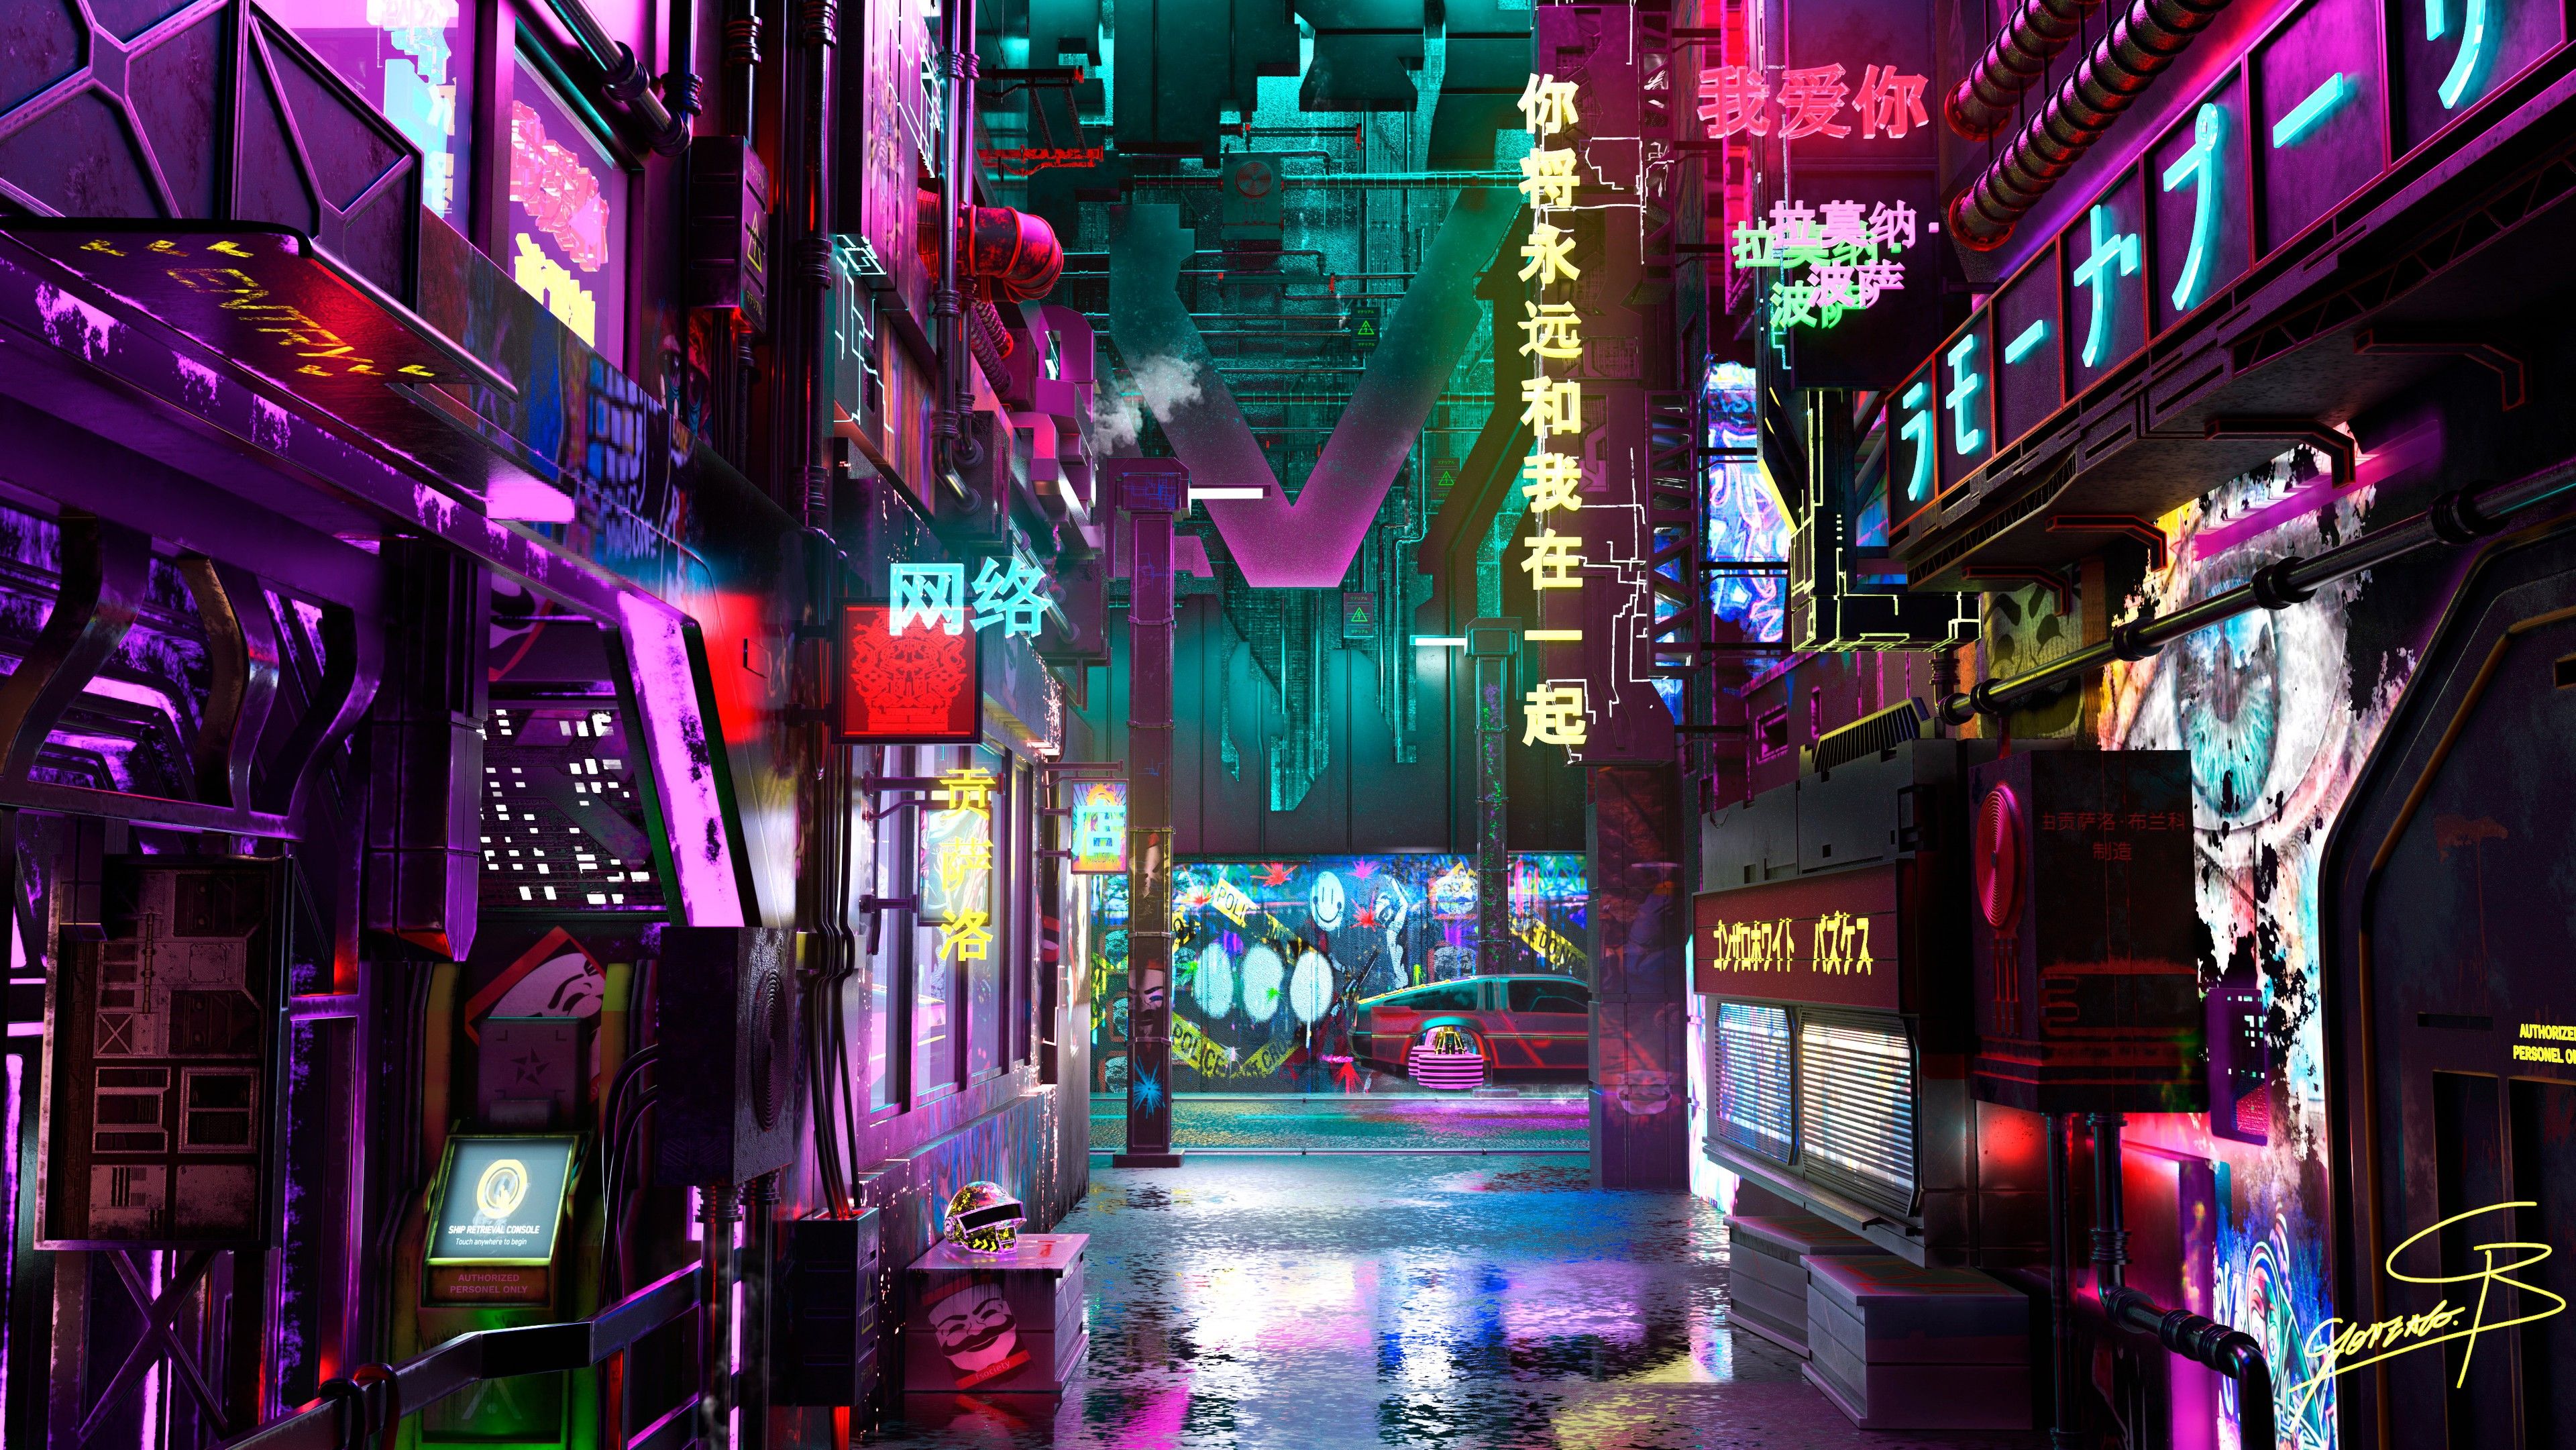 A dark alley with neon lights and signs - Tokyo, Cyberpunk